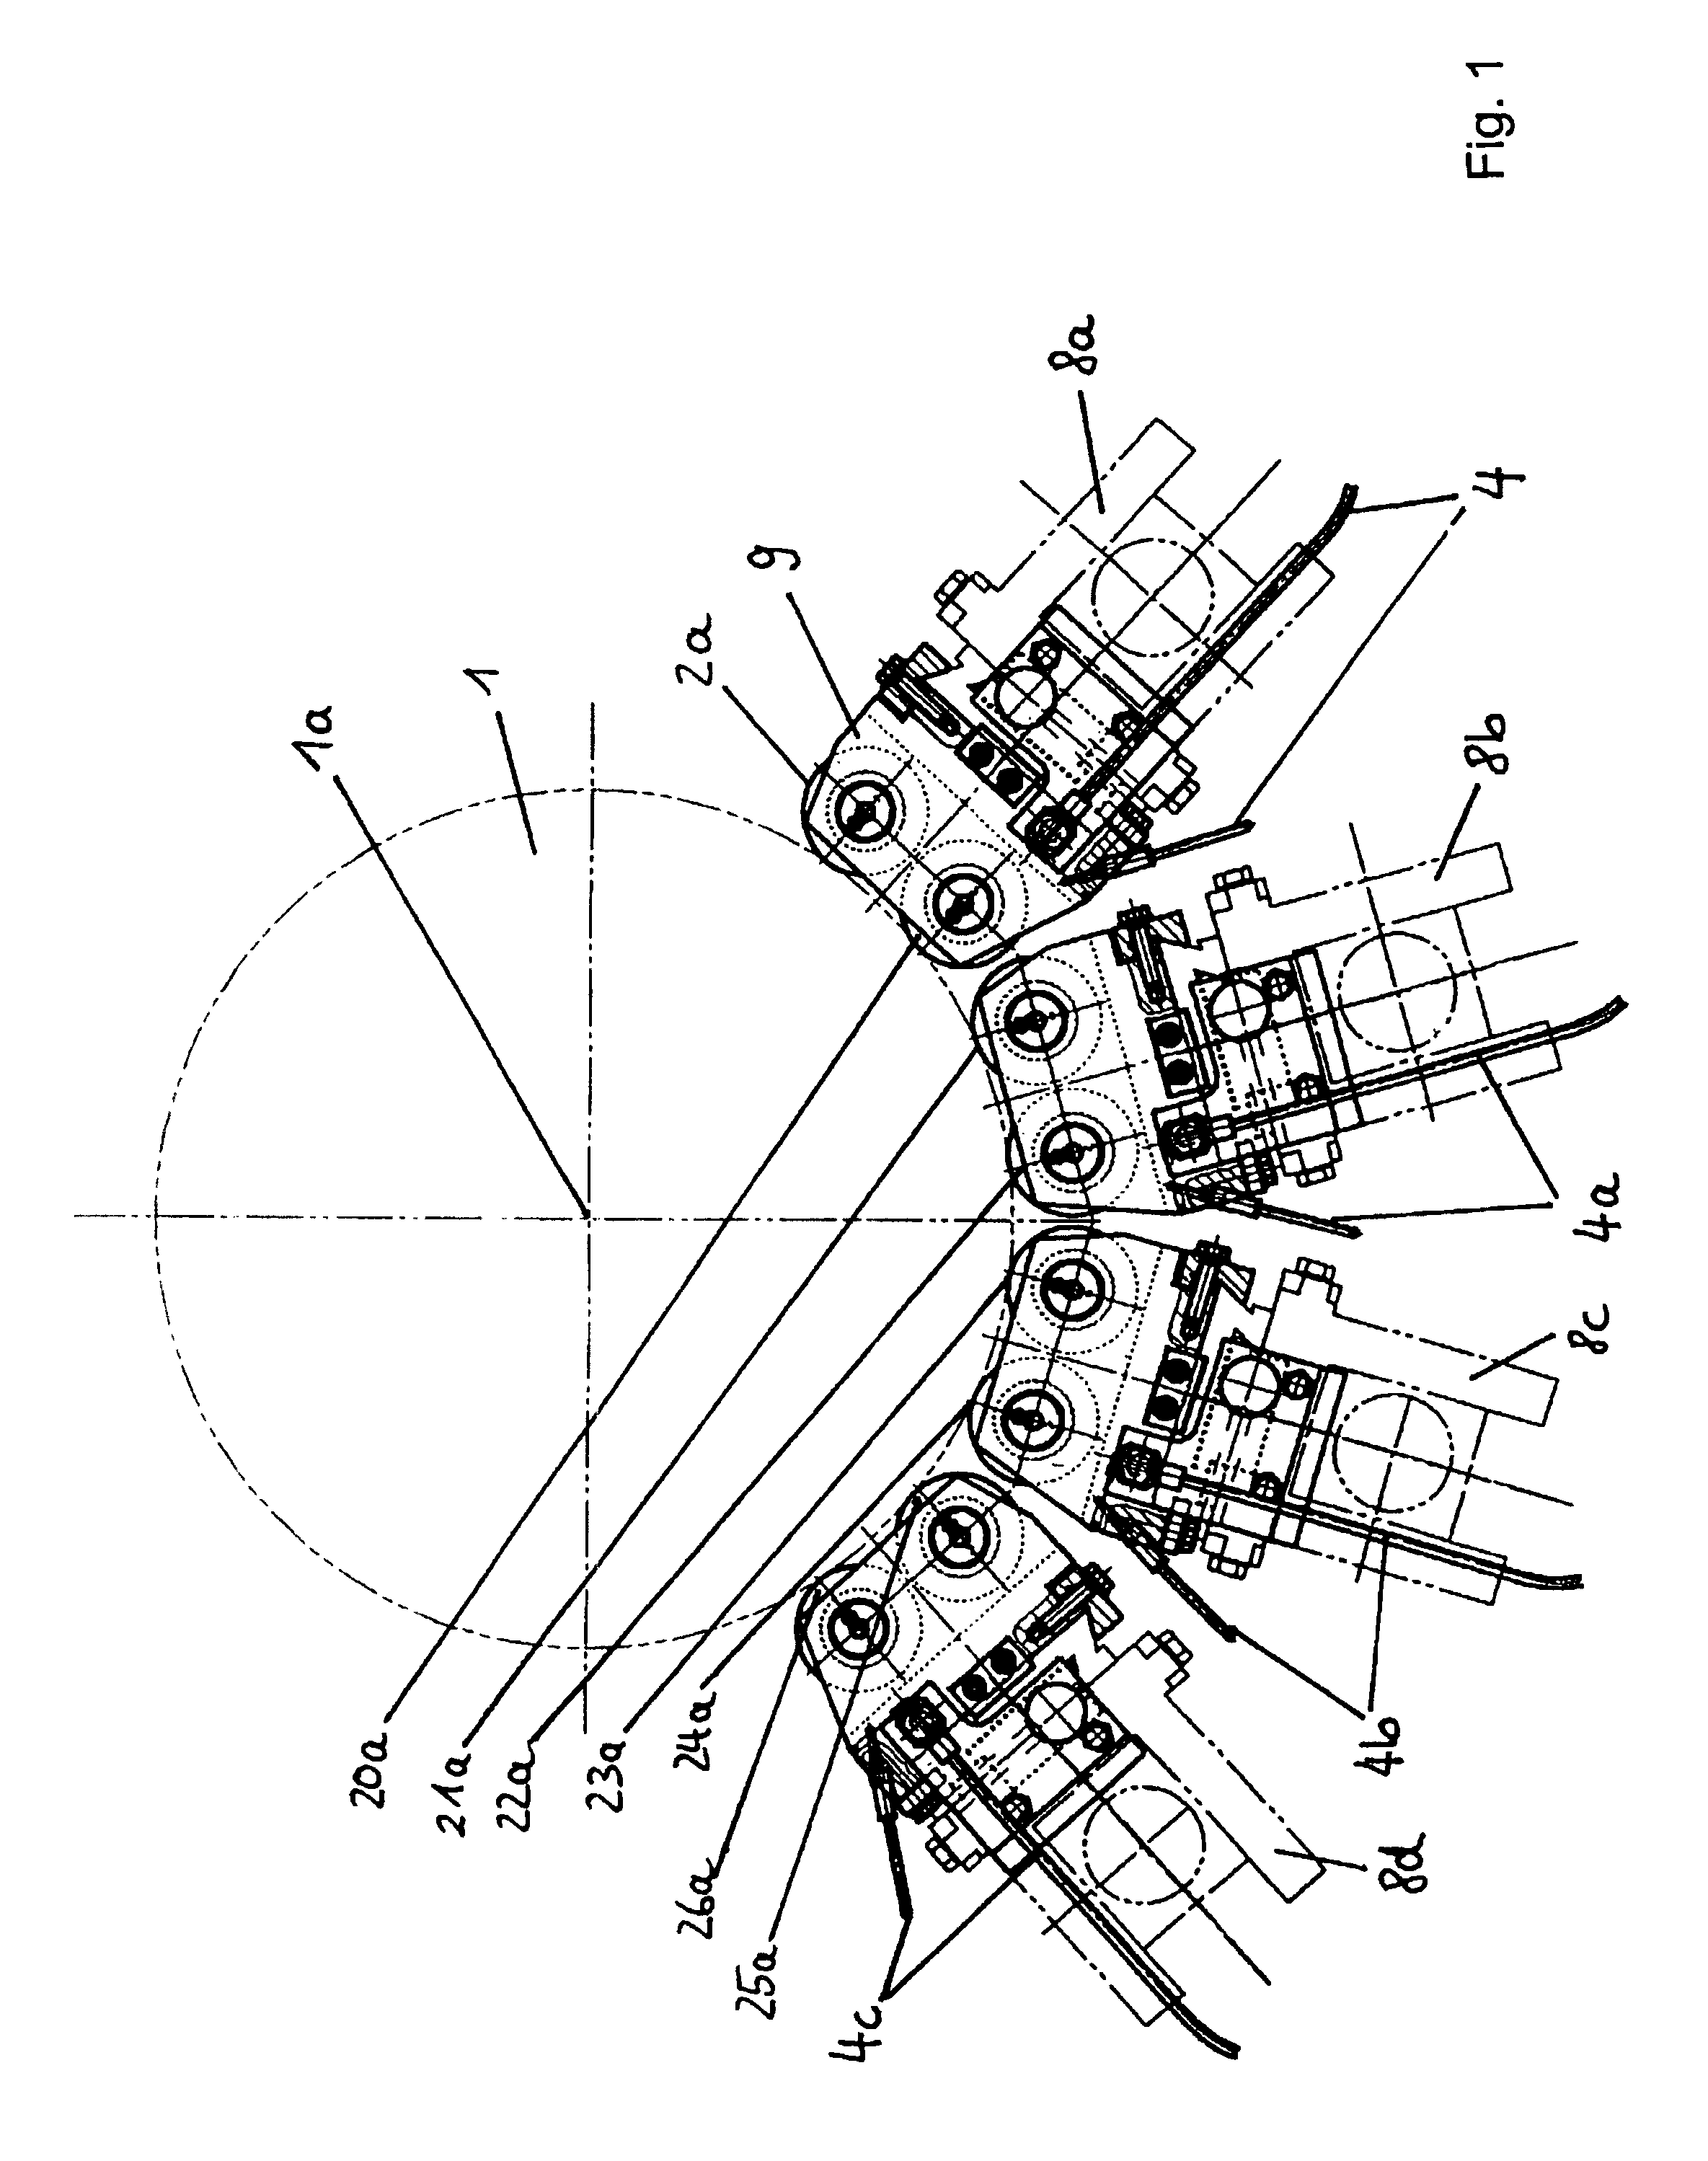 Device for applying at least one surface section of a transfer layer of a transfer film to a web of material and the use thereof